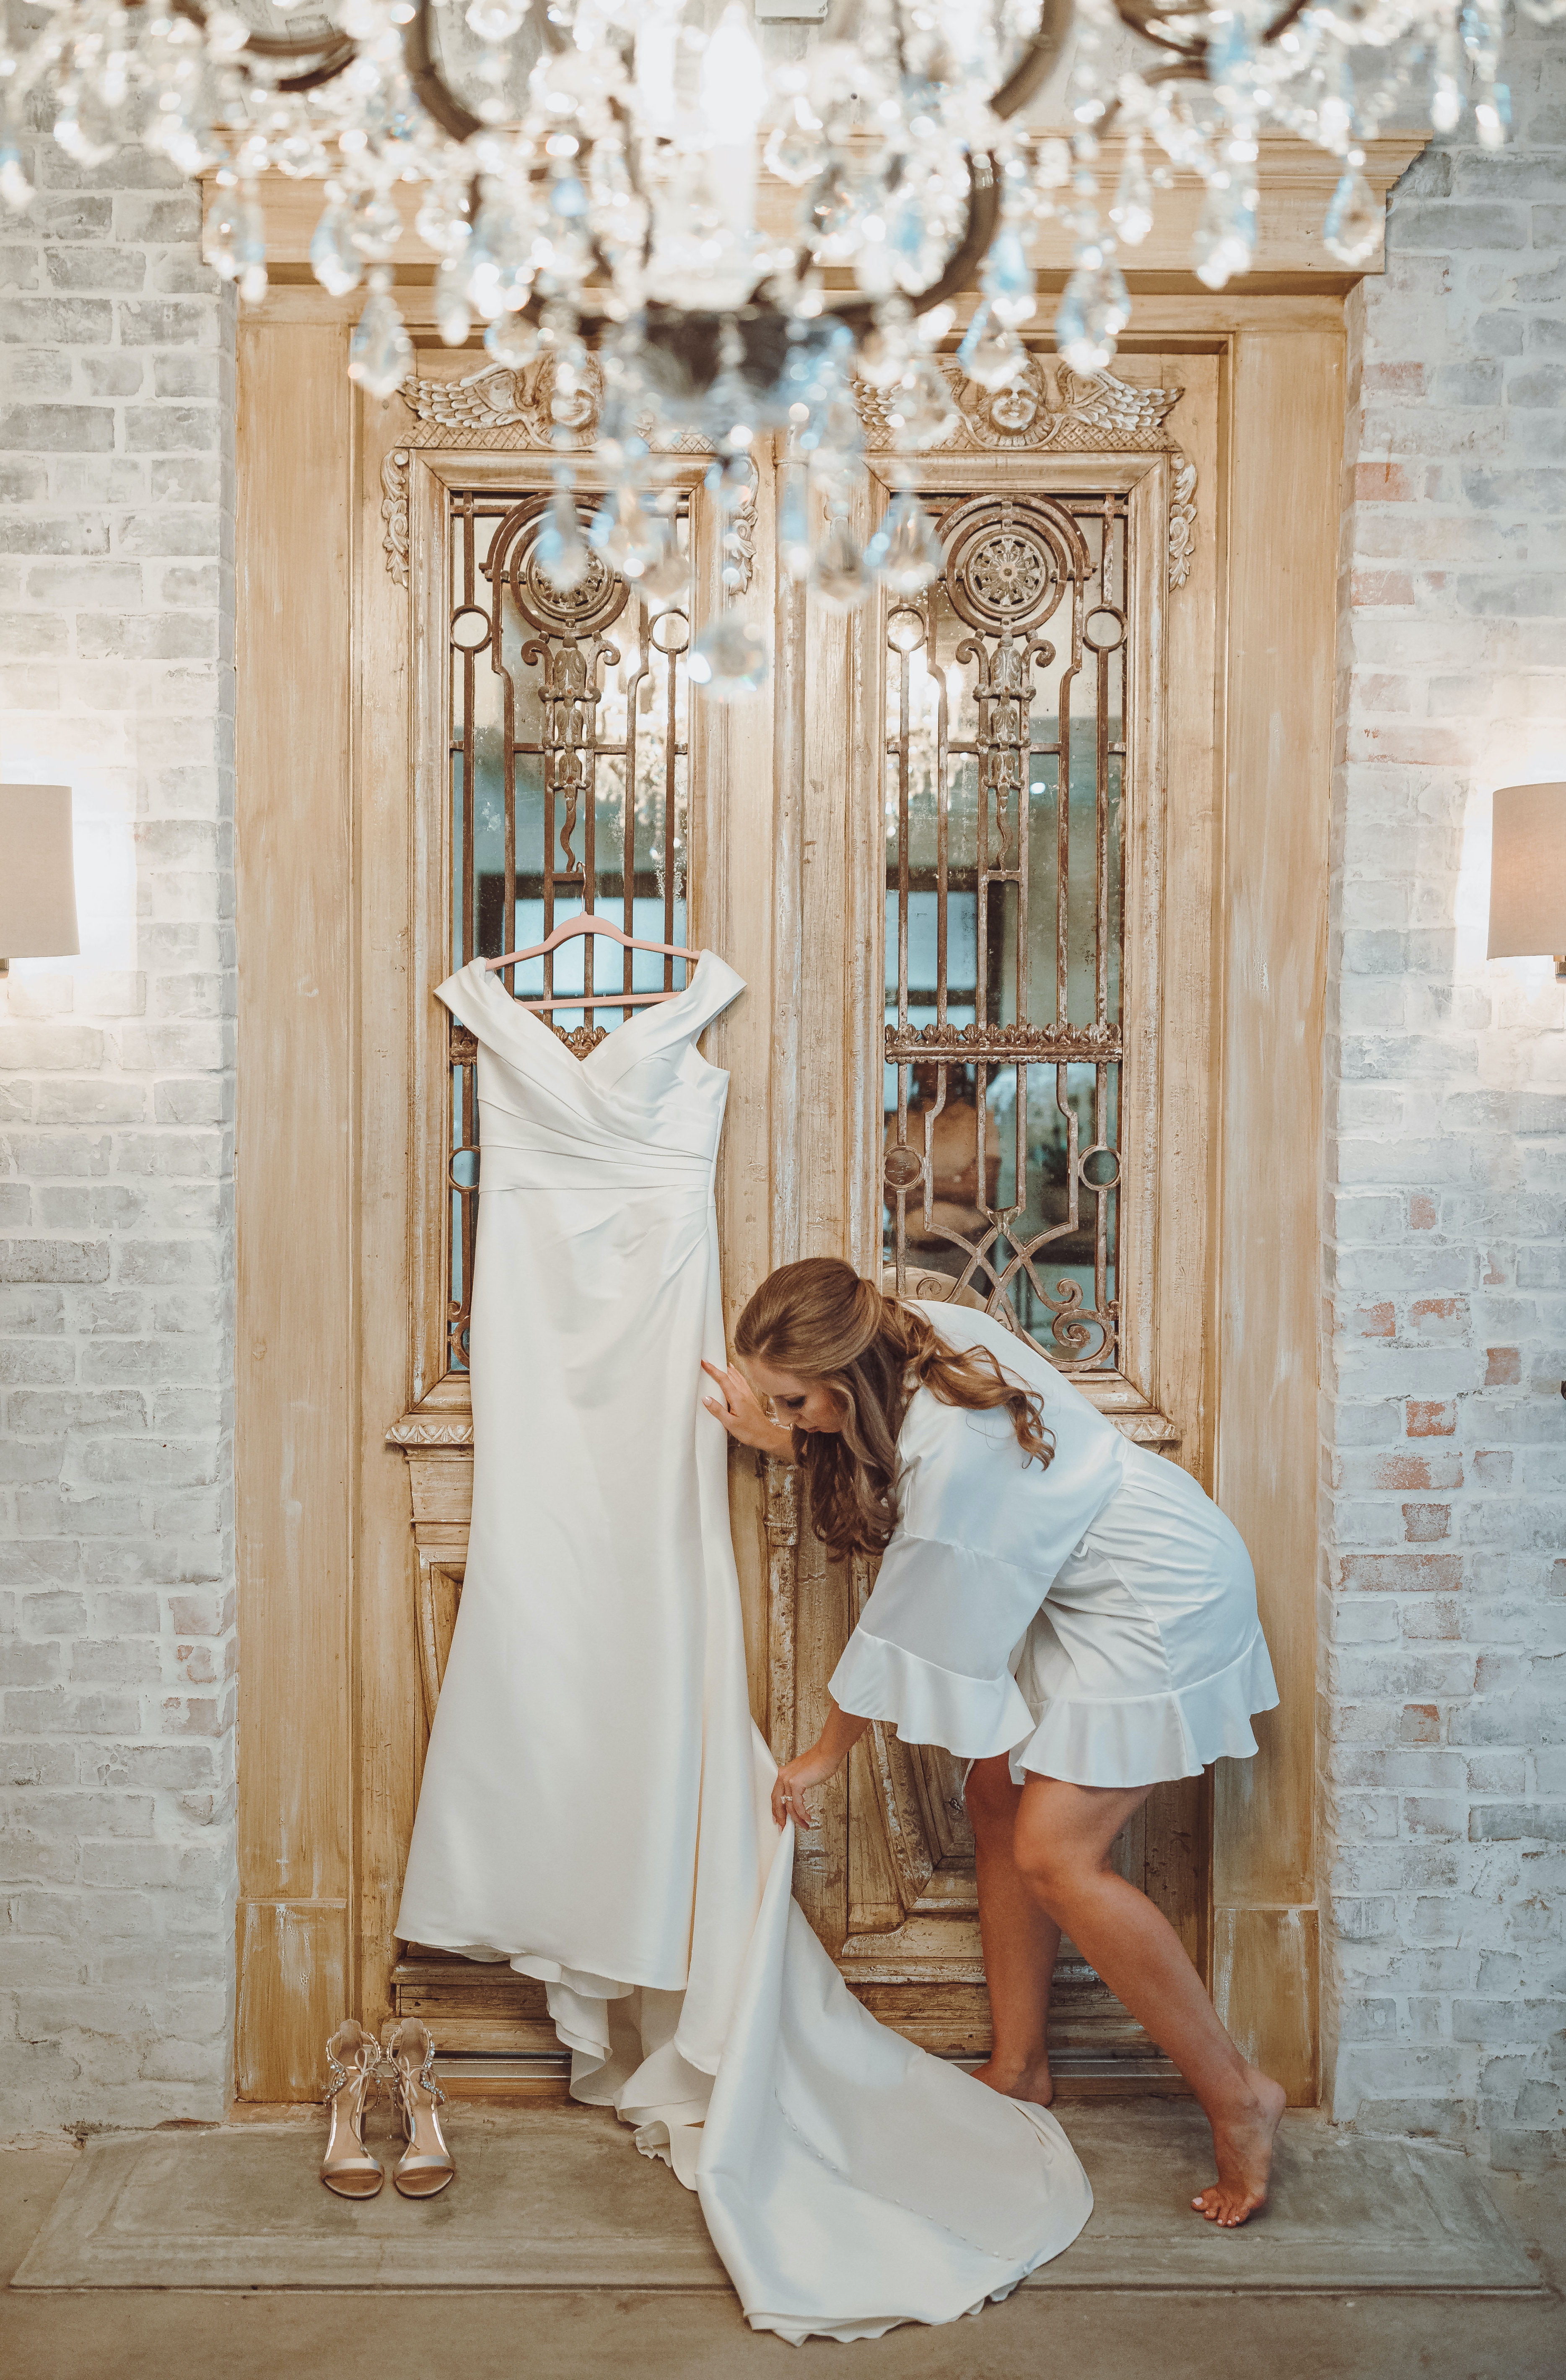 A bride fixes her dress that is hanging for her to put on in the bridal suite of The Astorian.